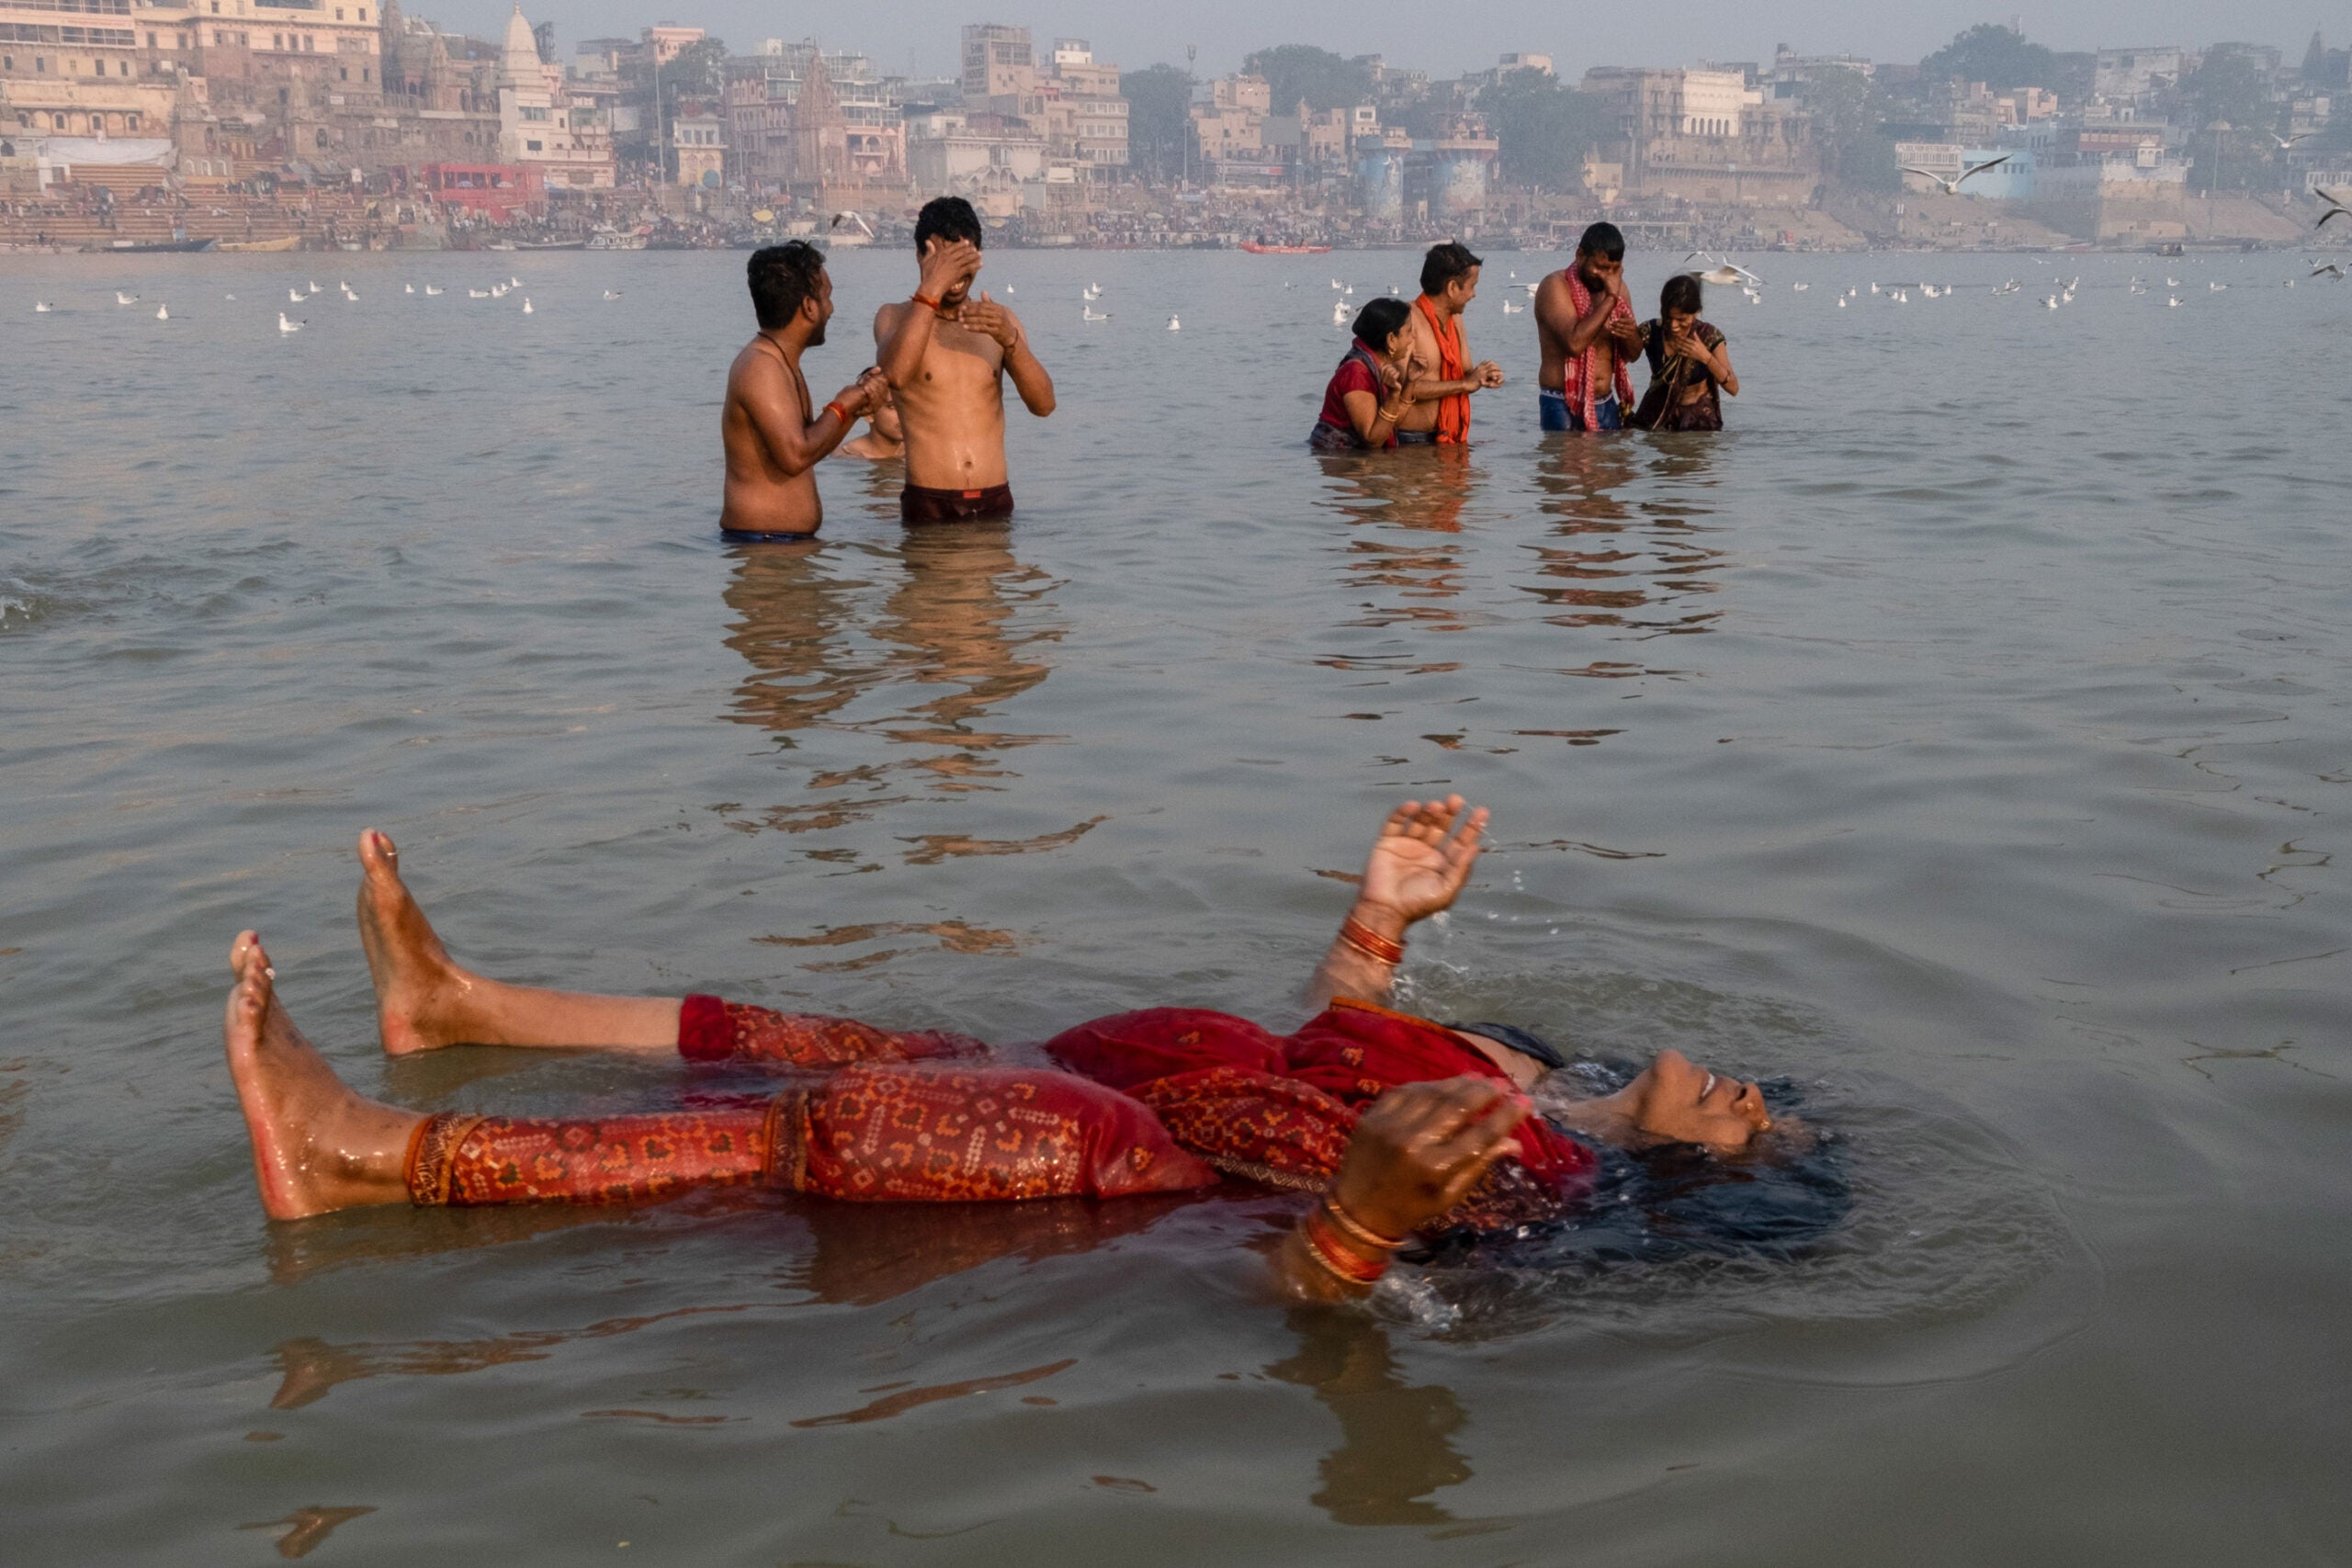 a woman floats on her back in a body of water